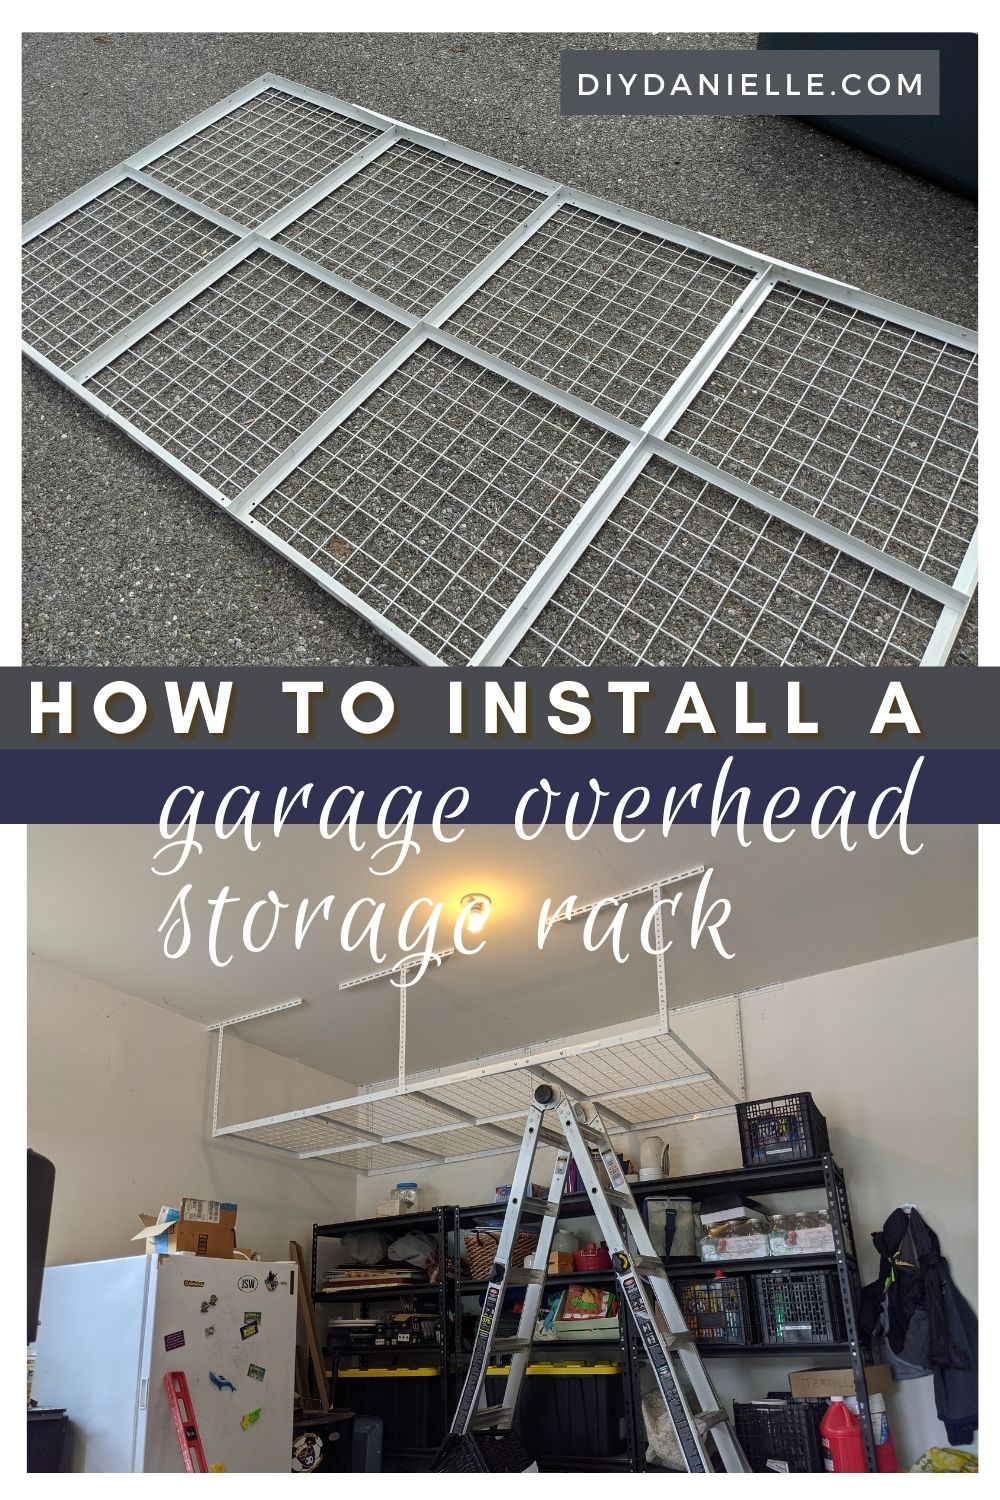 How to Organize a Garage + Cricut Giveaway - Live Like You Are Rich